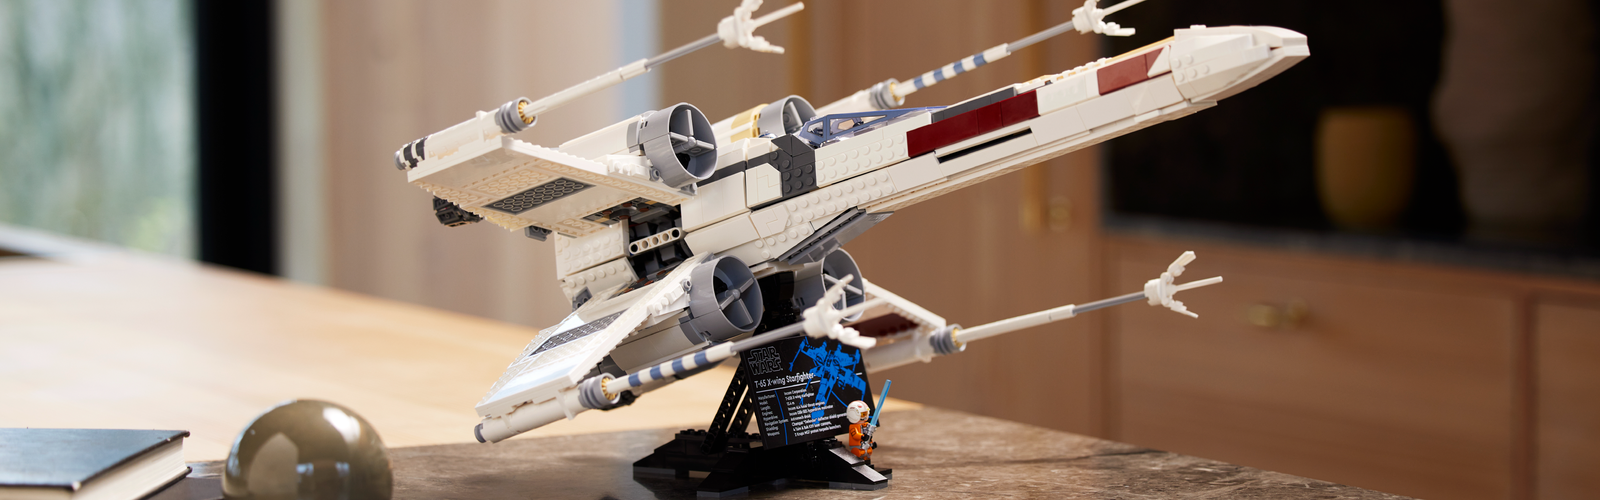 Best LEGO Star Wars sets to build your own galaxy in 2022